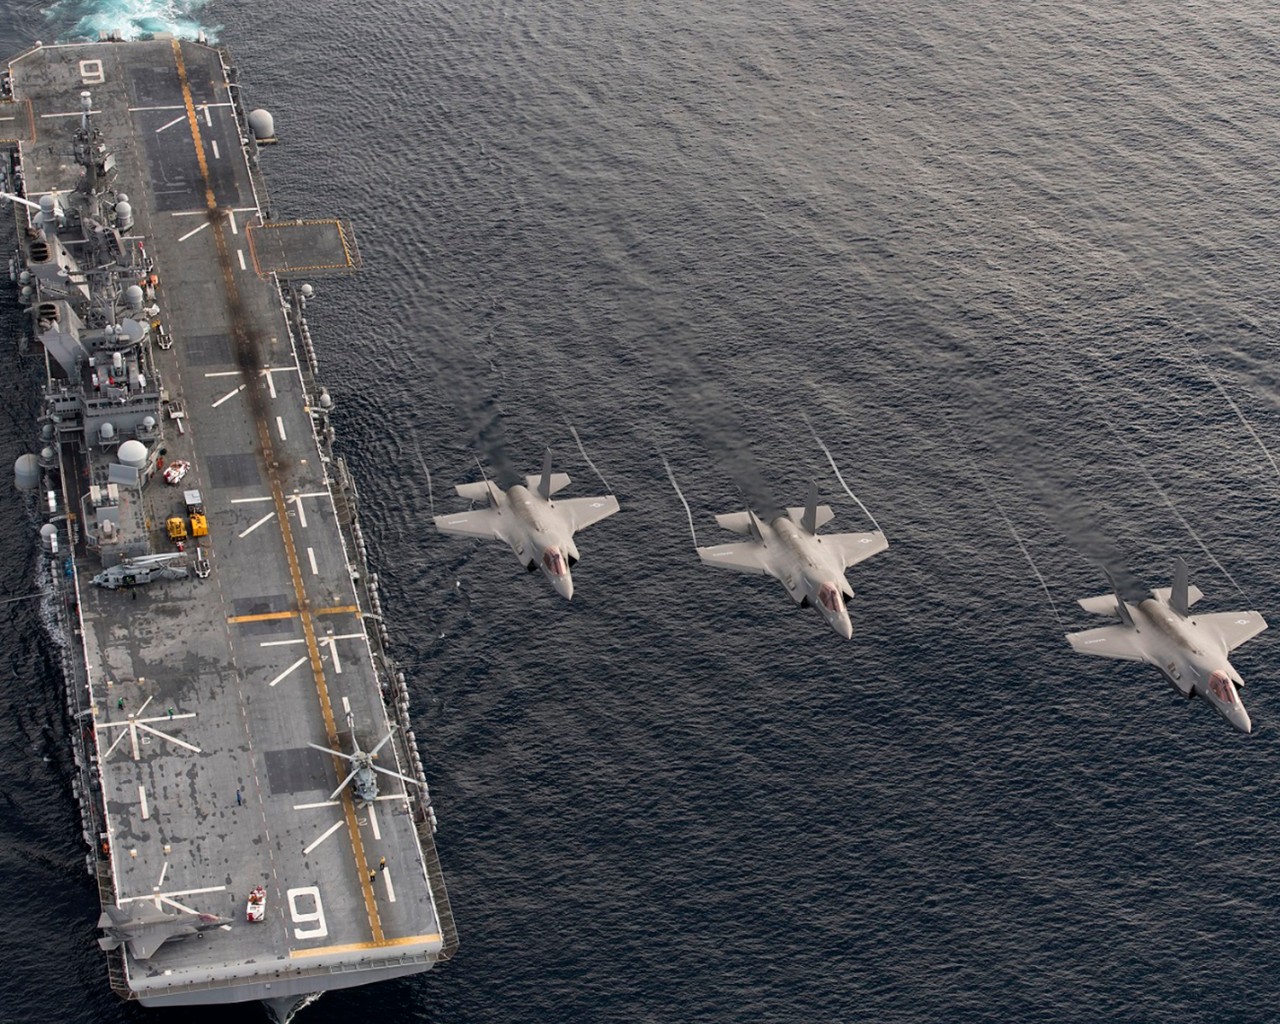 161120-N-VT045-0001 PACIFIC OCEAN (Nov. 19:: 2016) Four F-35B Lightning II aircraft perform a flyover above the amphibious assault ship USS America (LHA 6) during the Lightning Carrier Proof of Concept Demonstration. The F-35B will eventually rep...